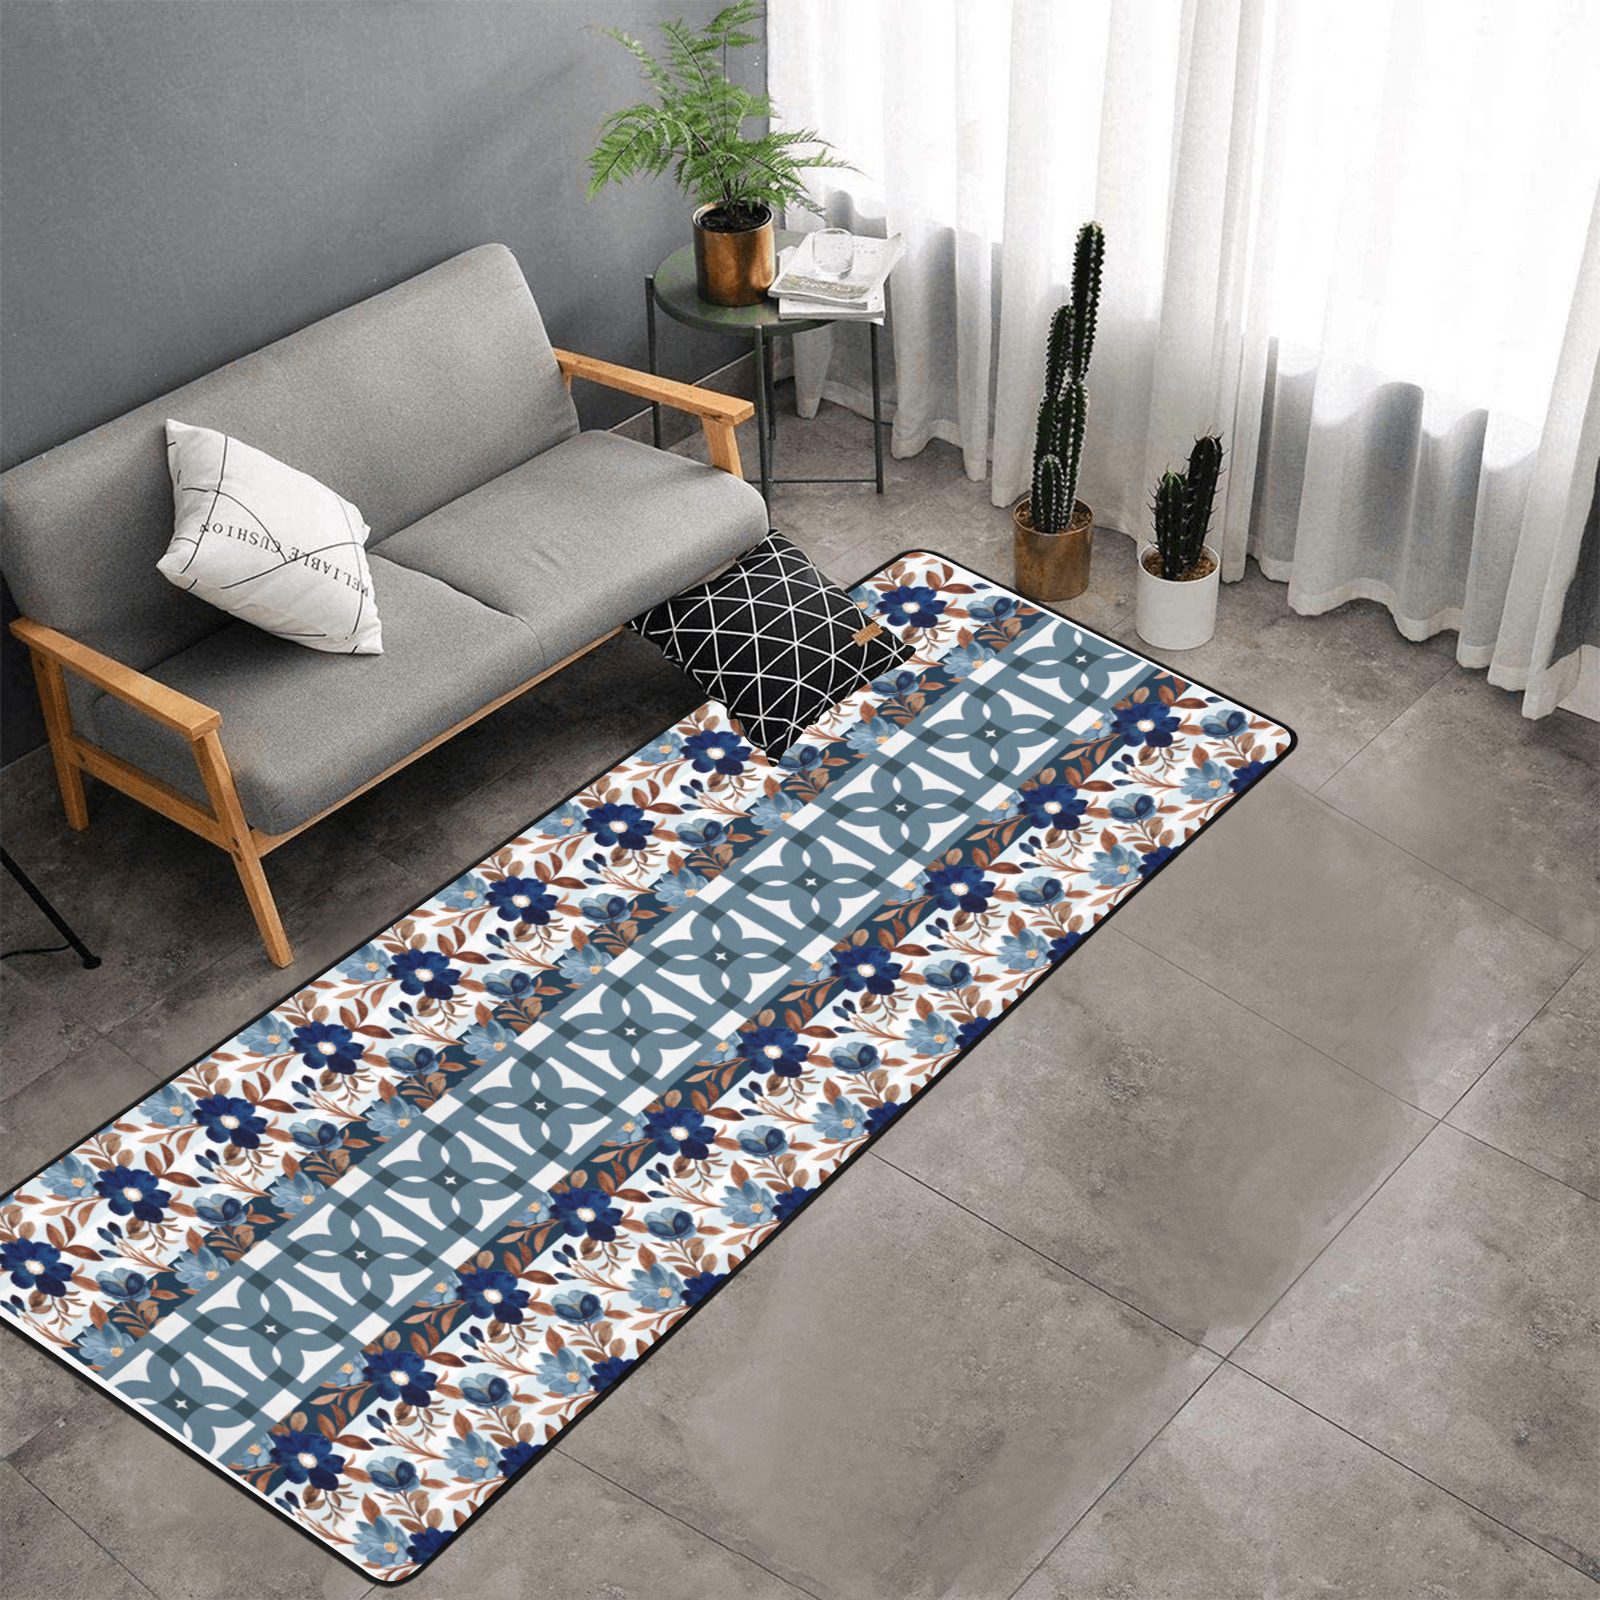 Blue Floral with tile Rug Area Rug with Black Binding 9'6''x3'3''